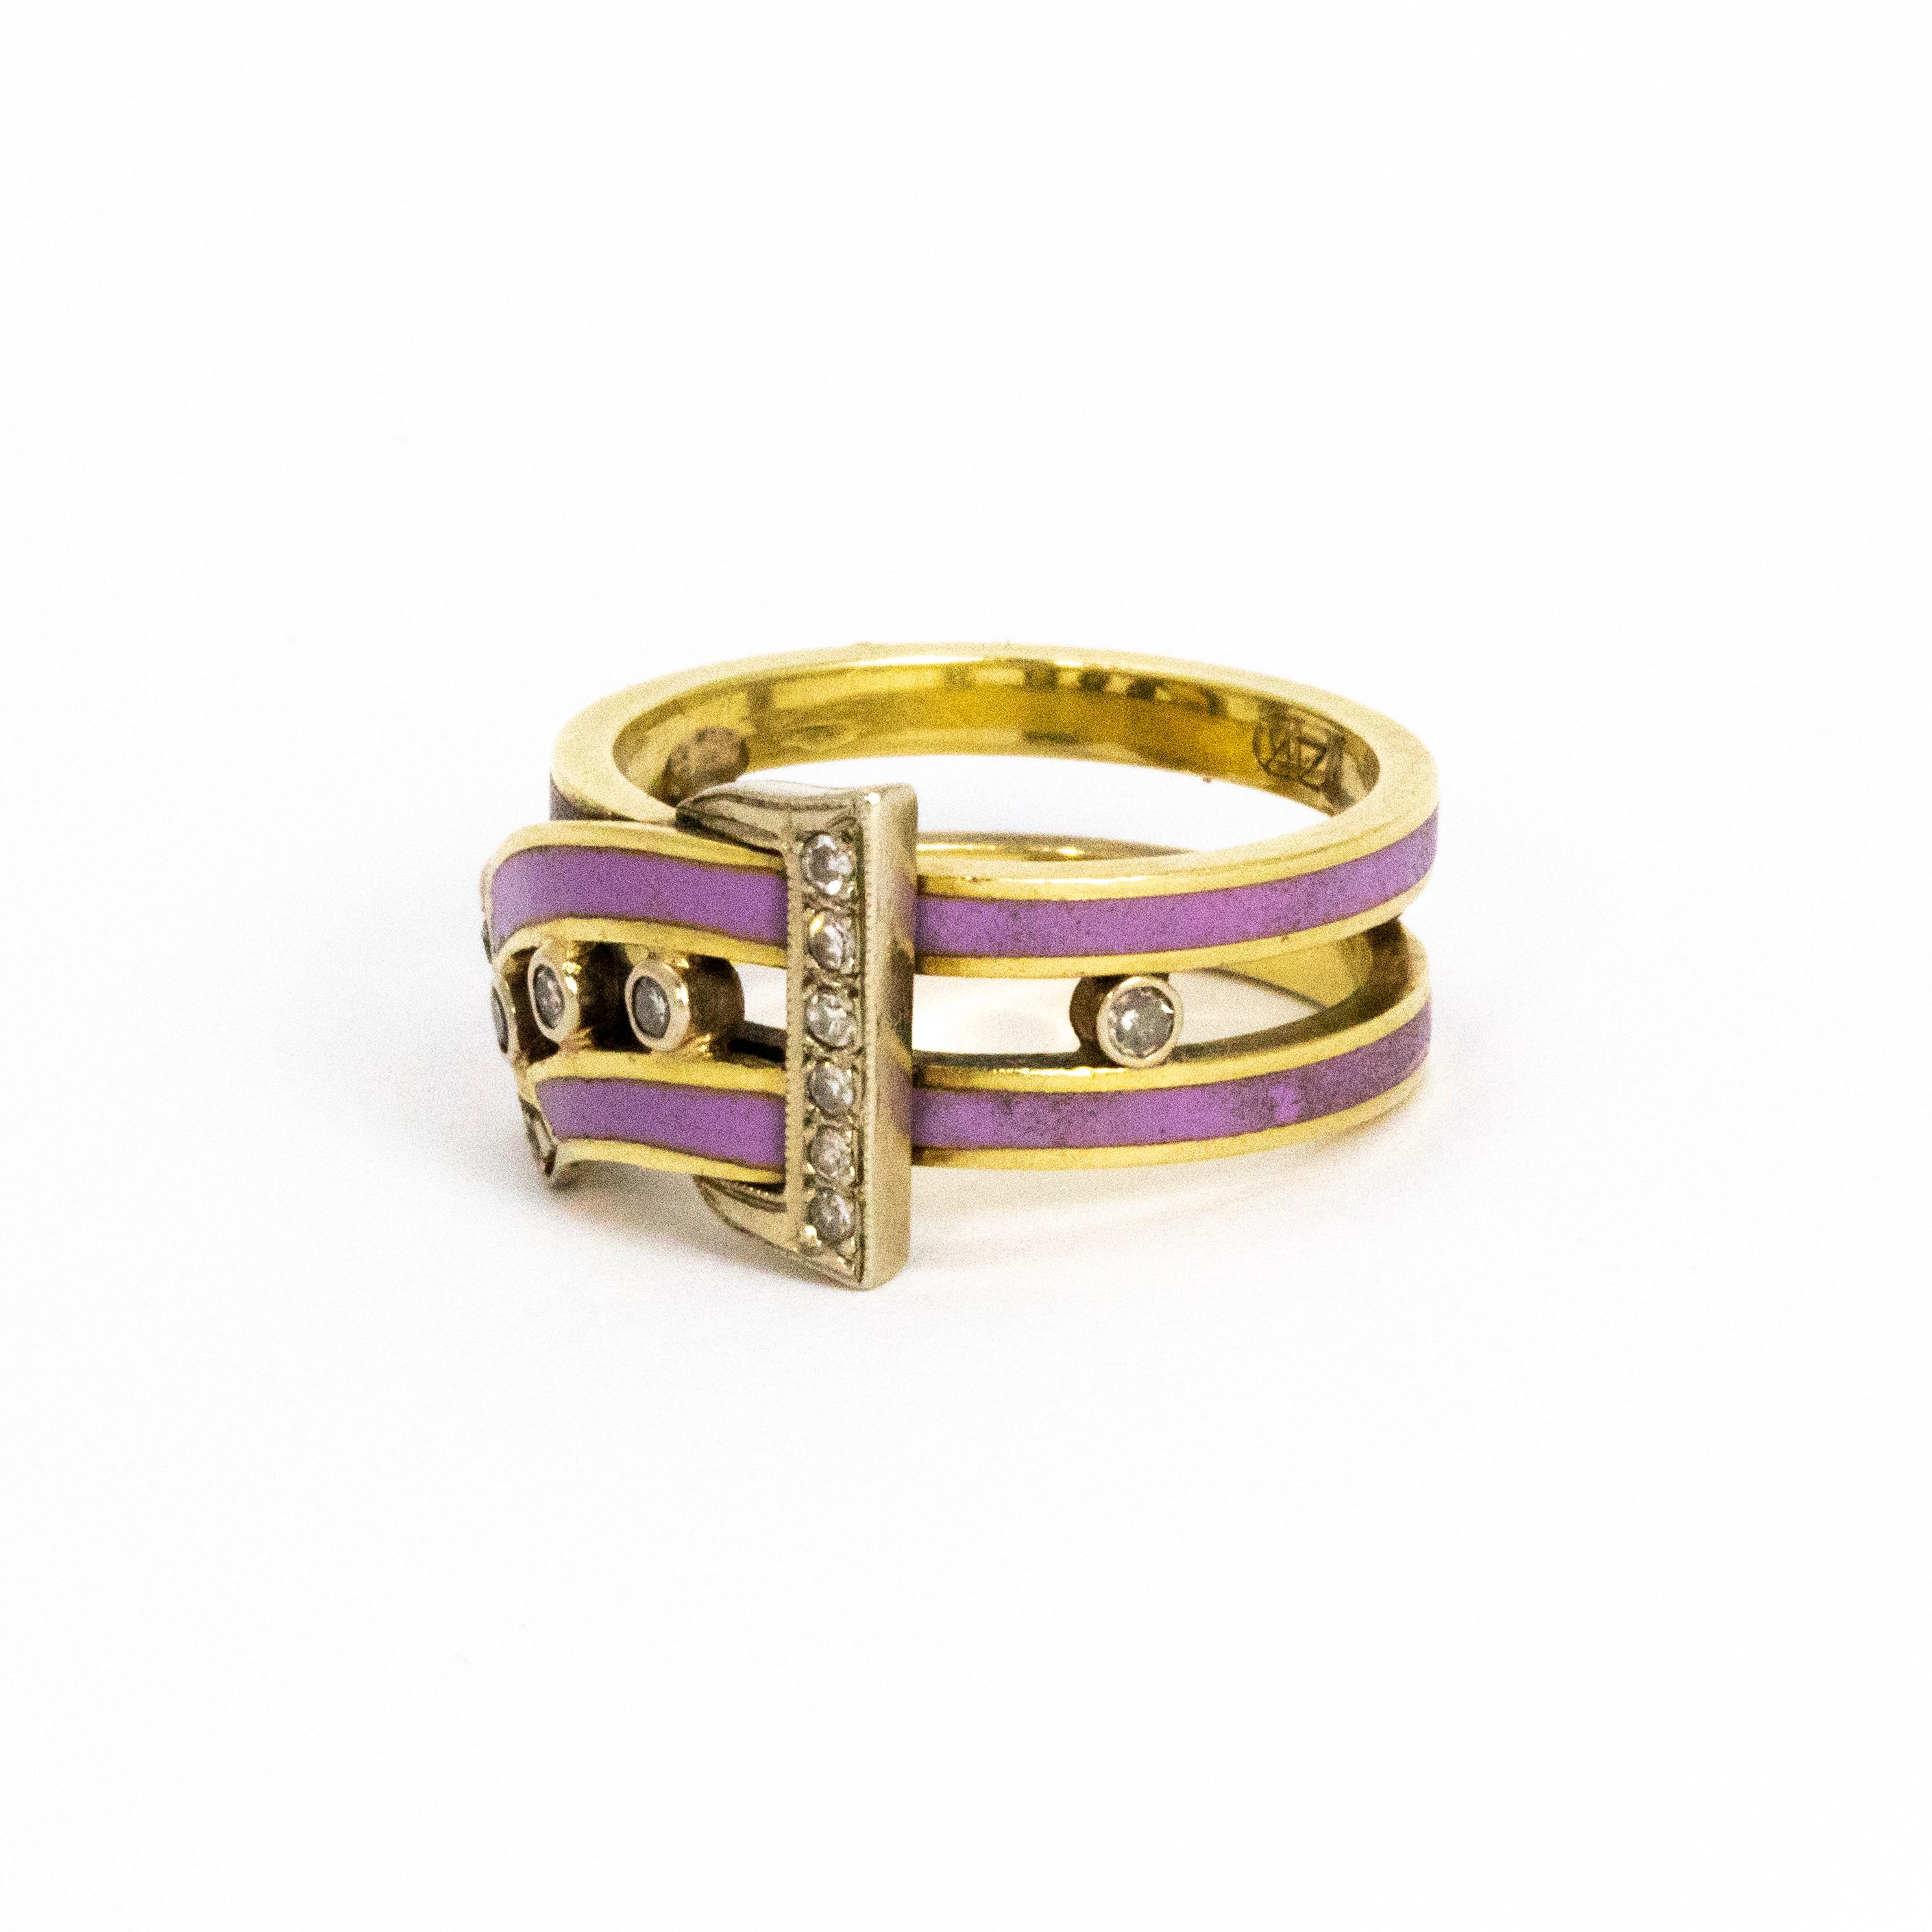 Striking lilac enamel ring in a buckle design and delicately decorated with diamonds. Modelled out of 14ct gold.

Ring size: N 1/2 or 7 